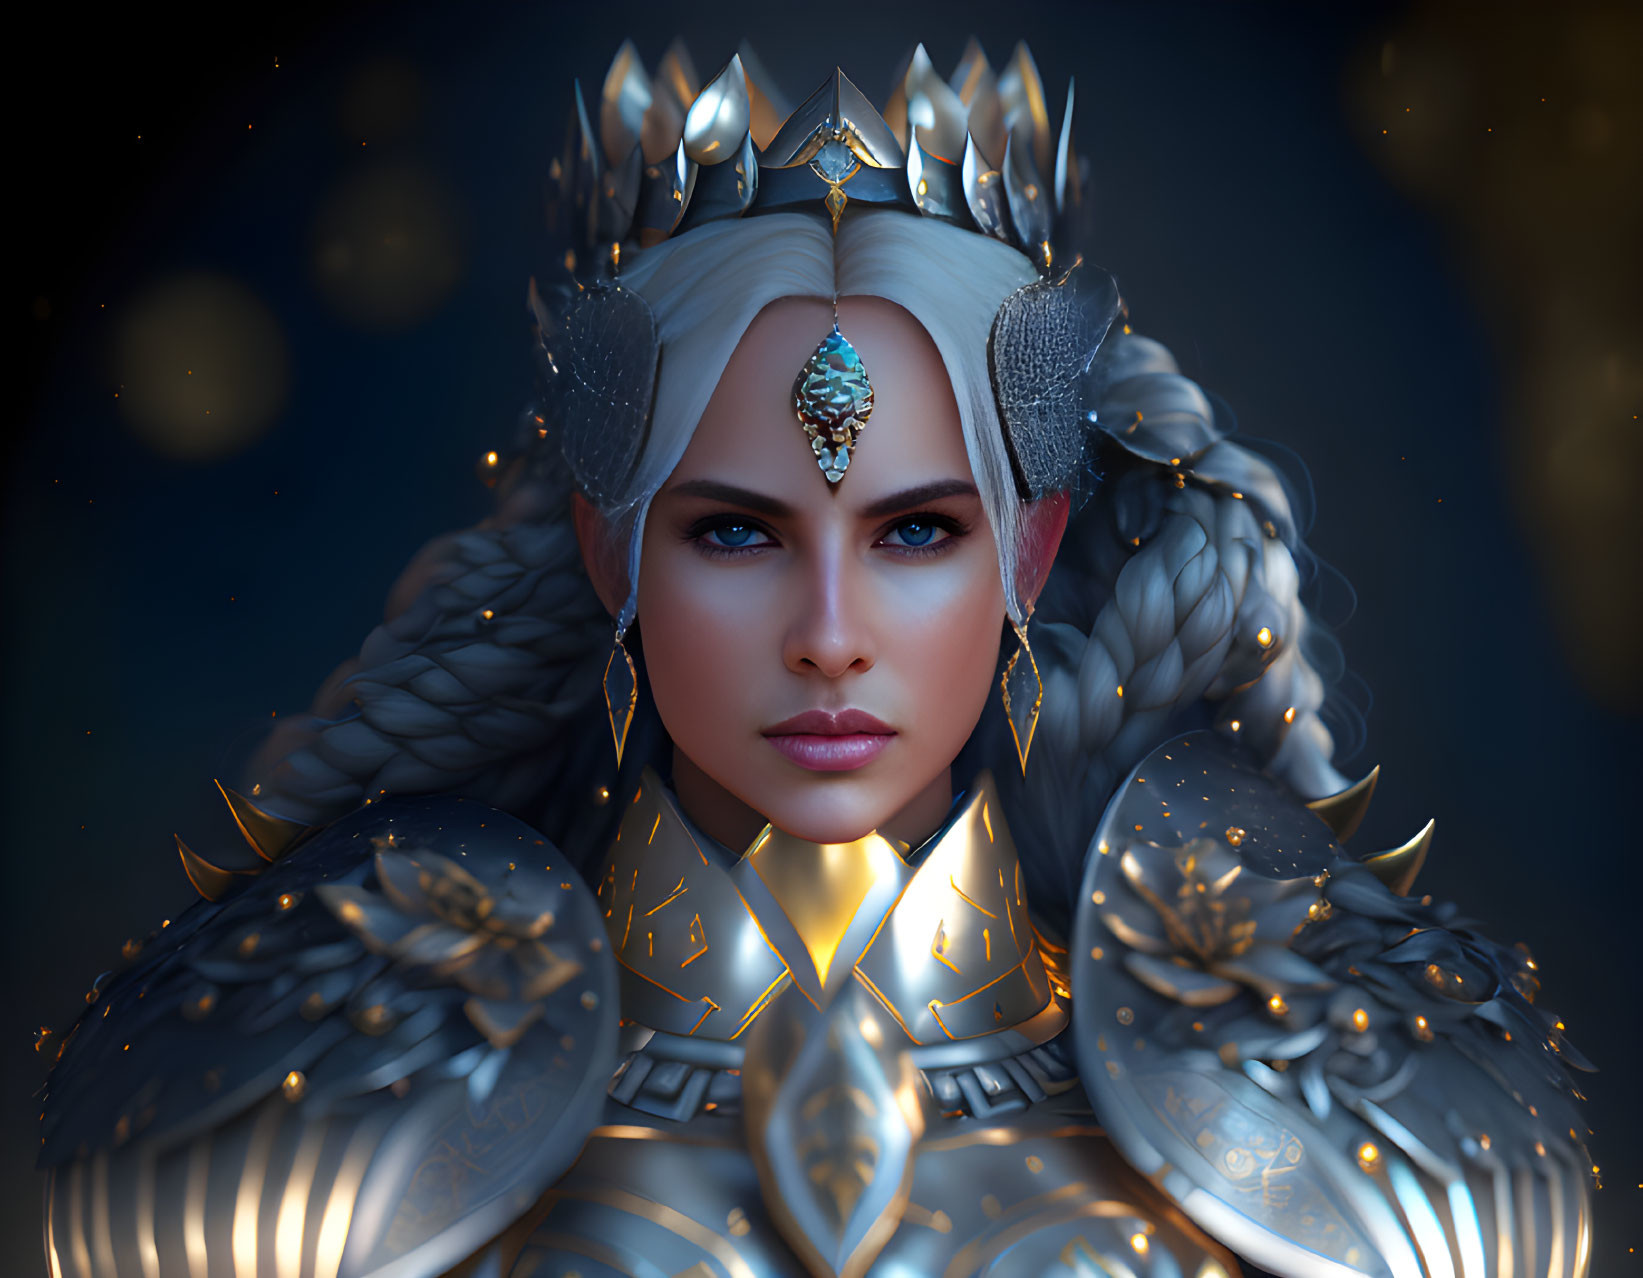 Glowing blue-eyed figure in ornate crown and armor under starlit sky